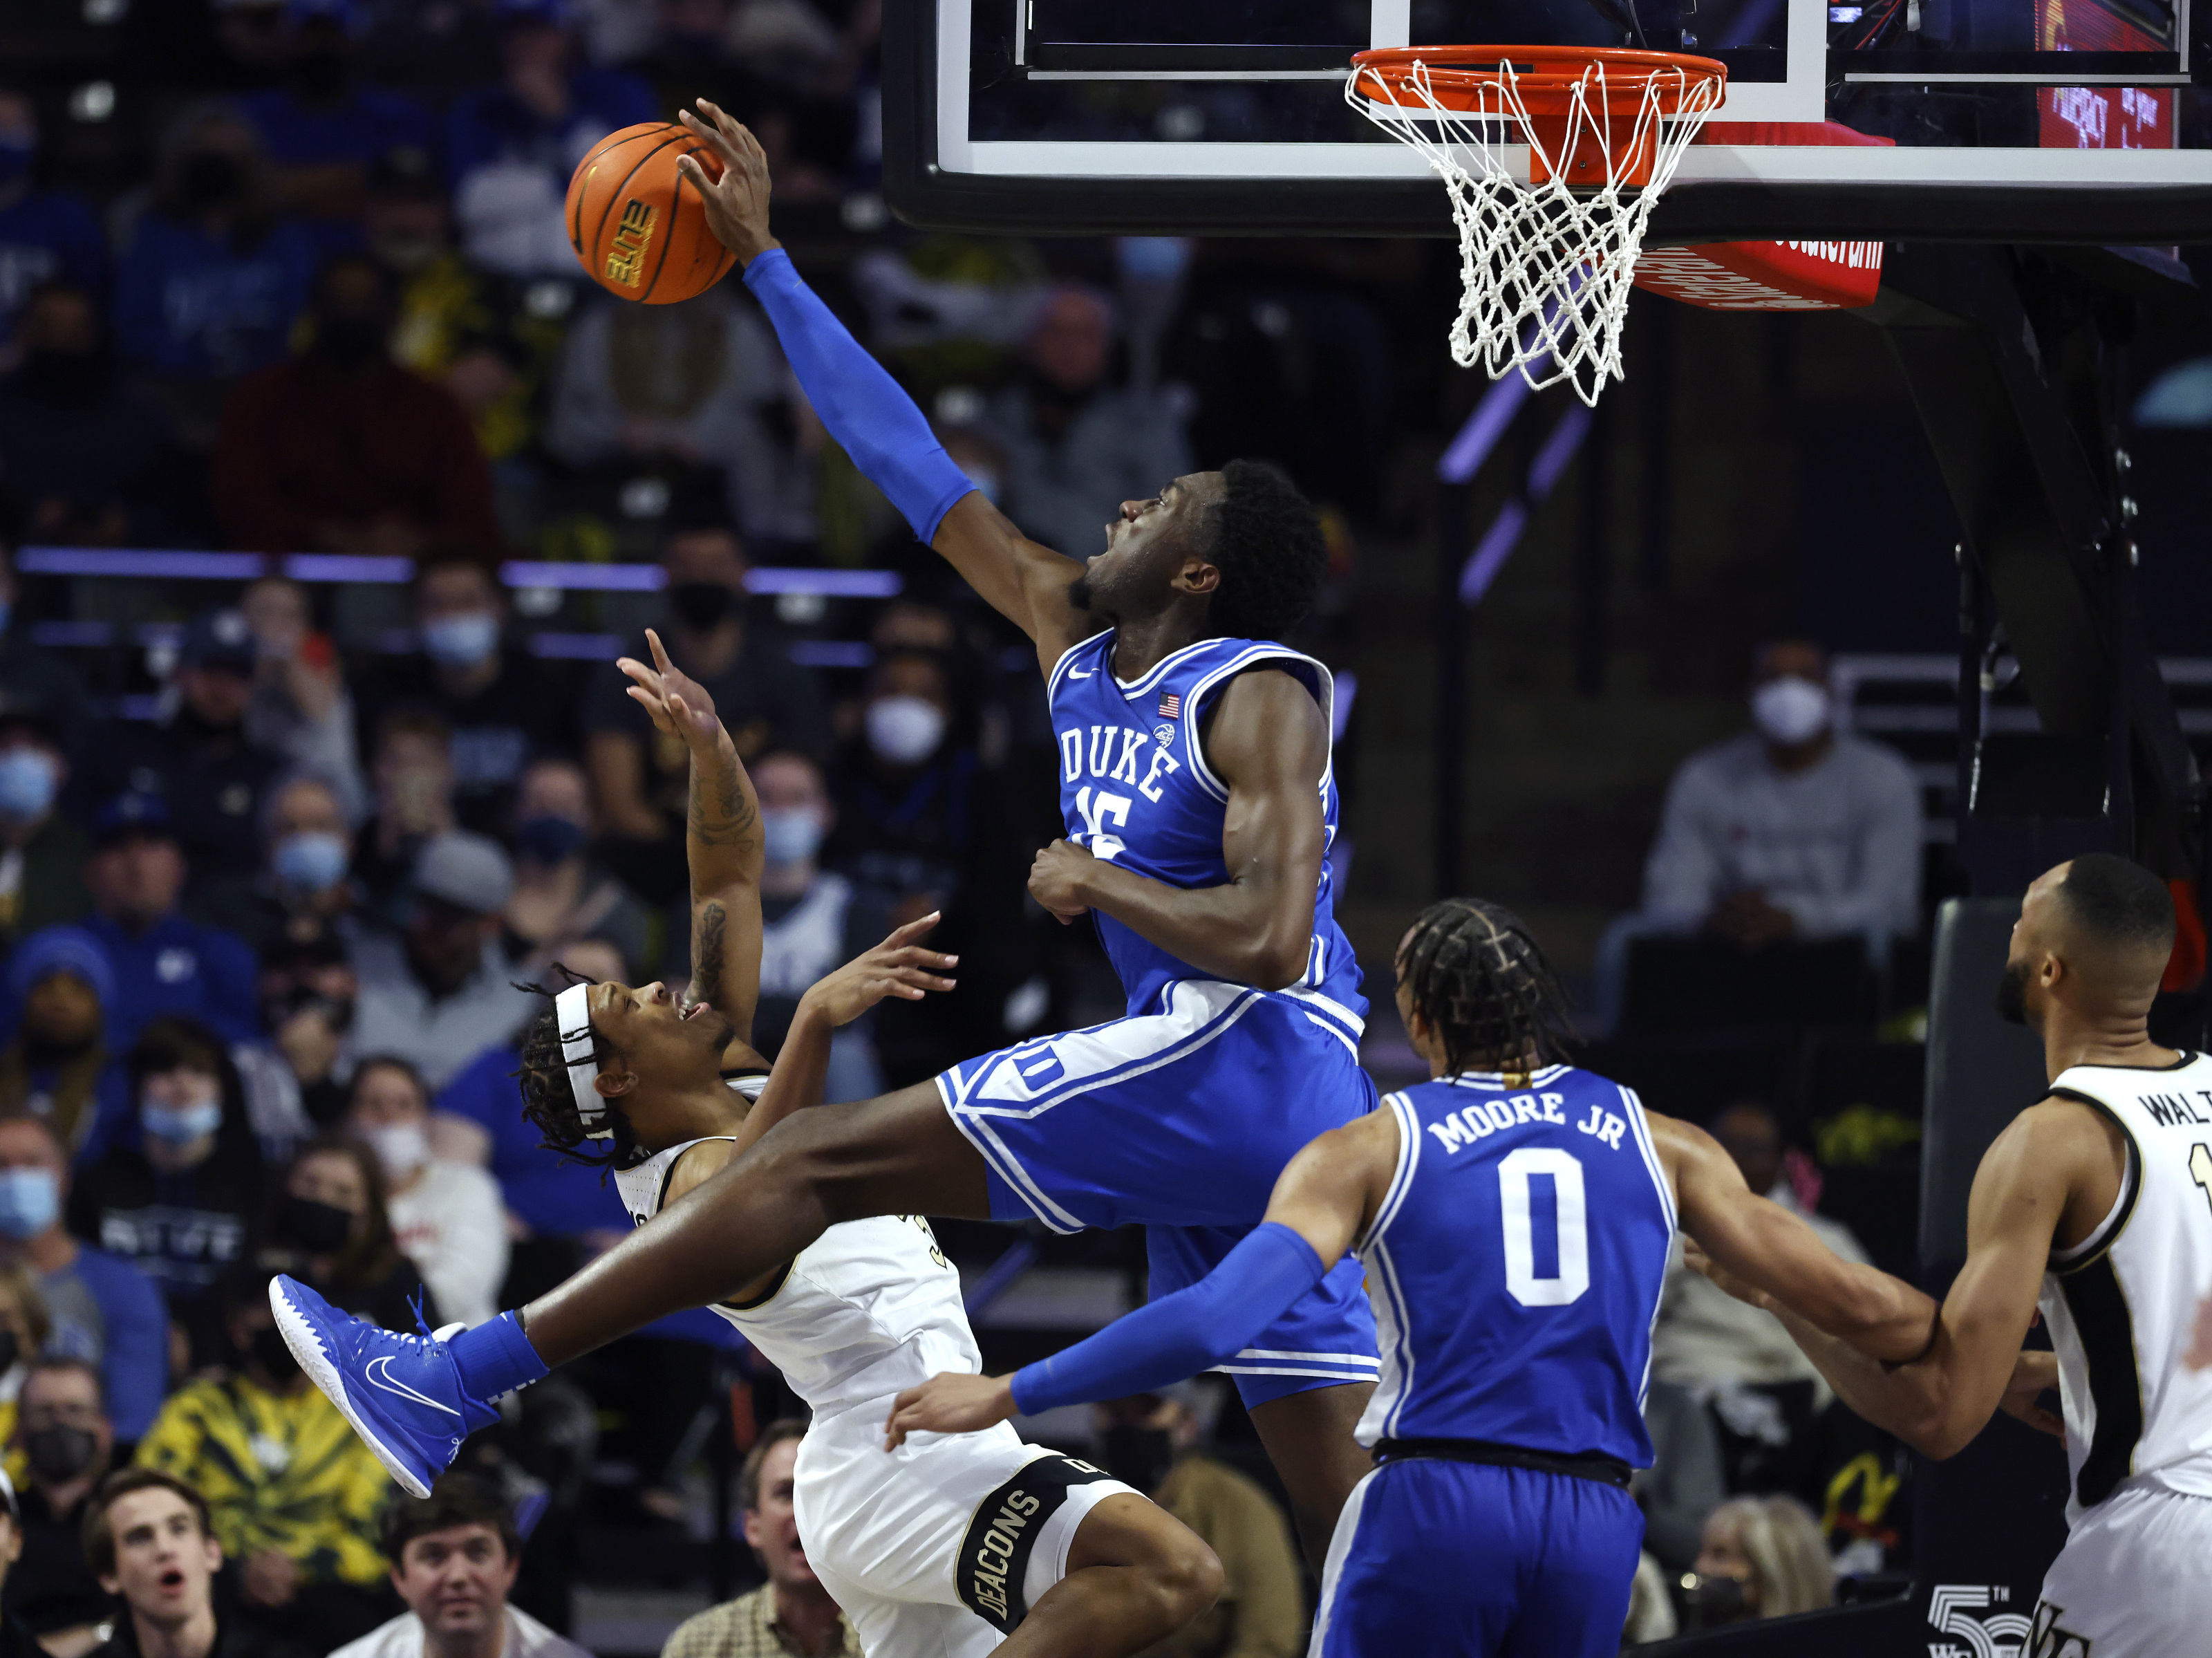 Duke basketball throws nation's best block parties of late